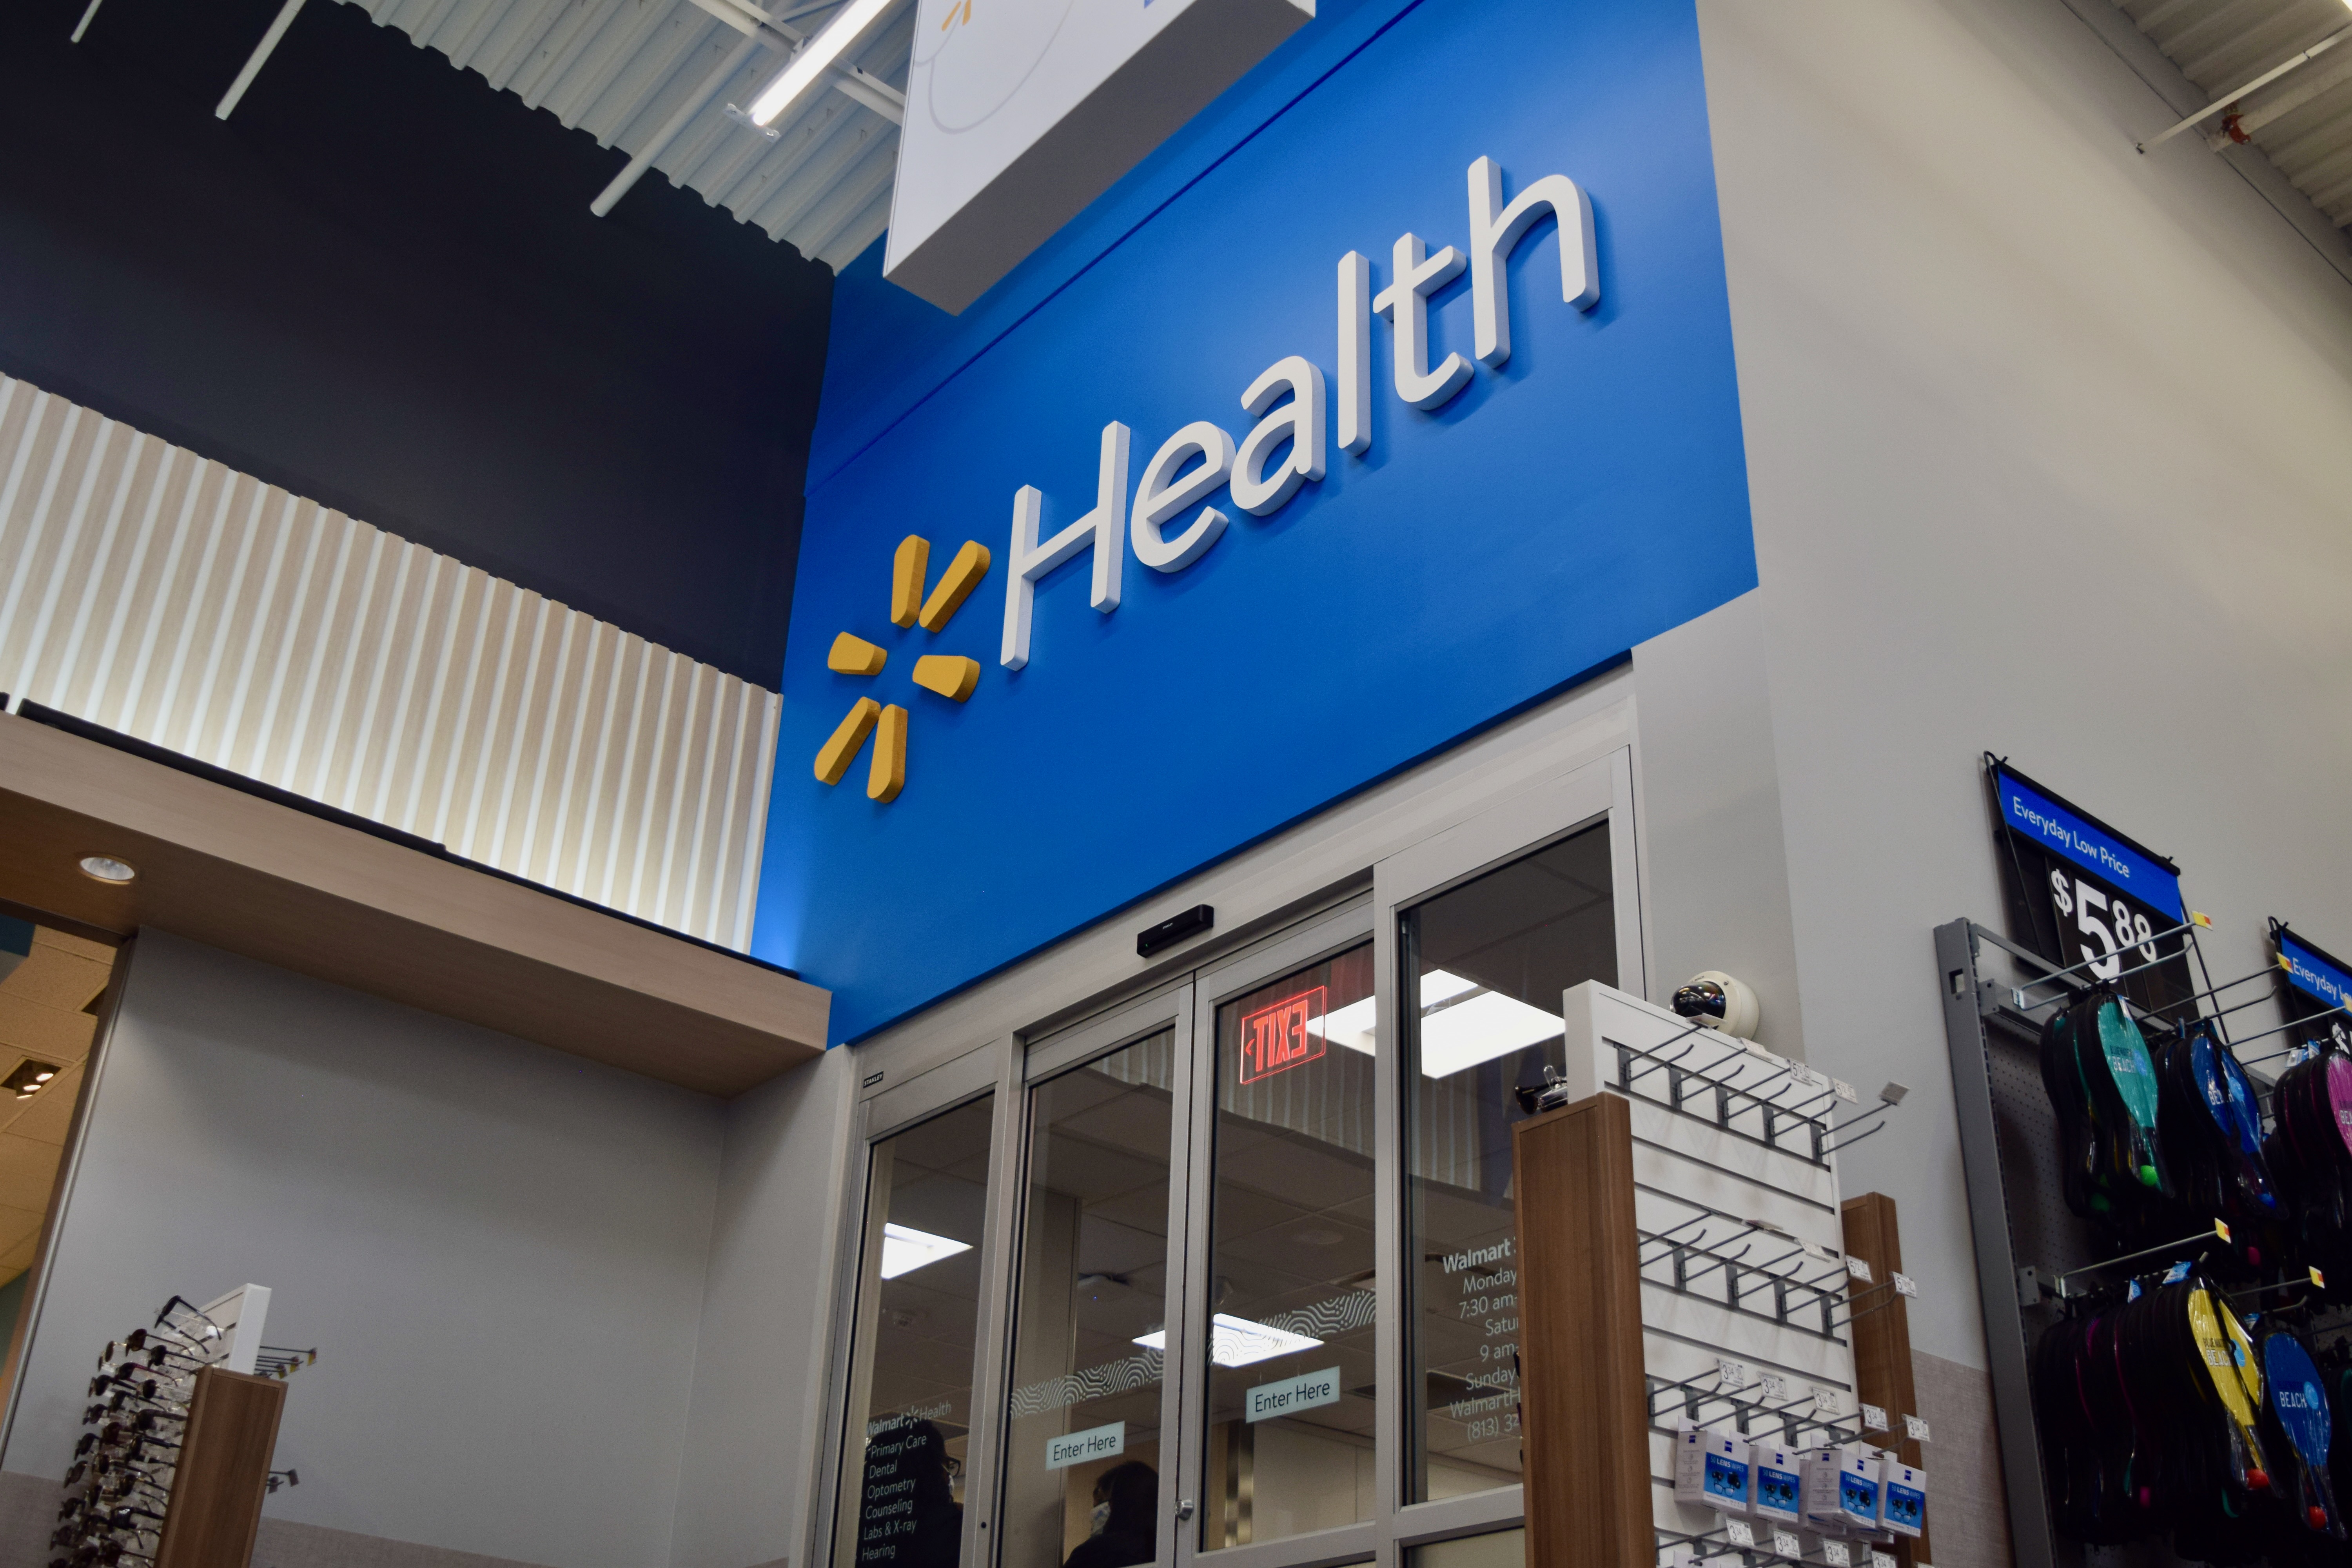 Walmart begins its move into dental care with Walmart Health